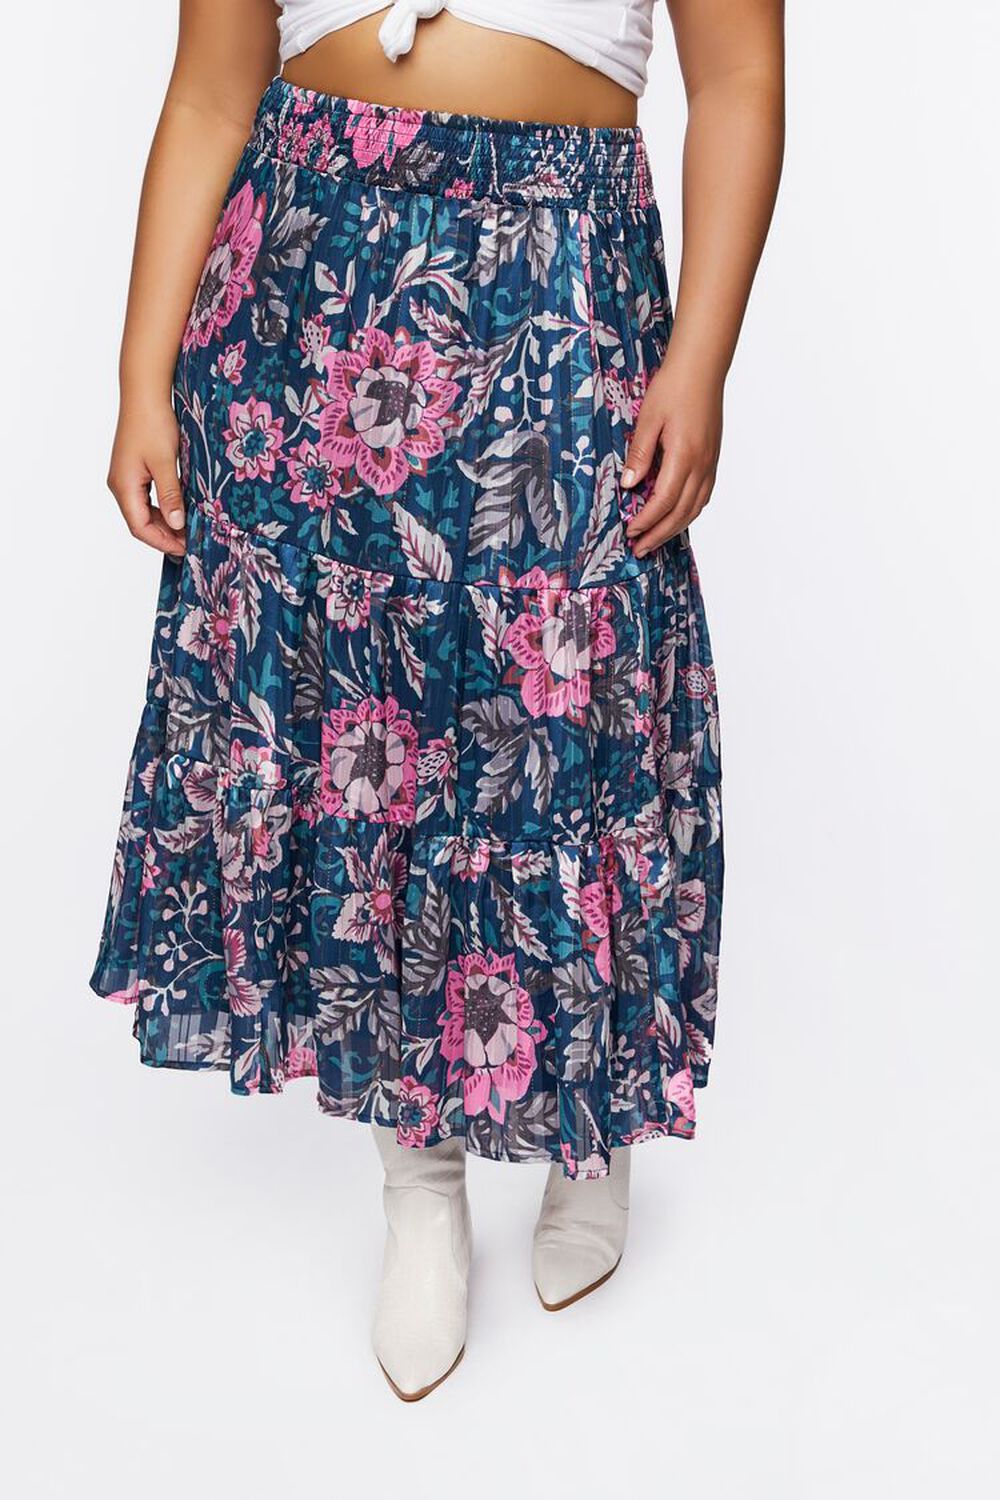 BLUE/MULTI Plus Size Floral Print Tiered Maxi Skirt, image 2